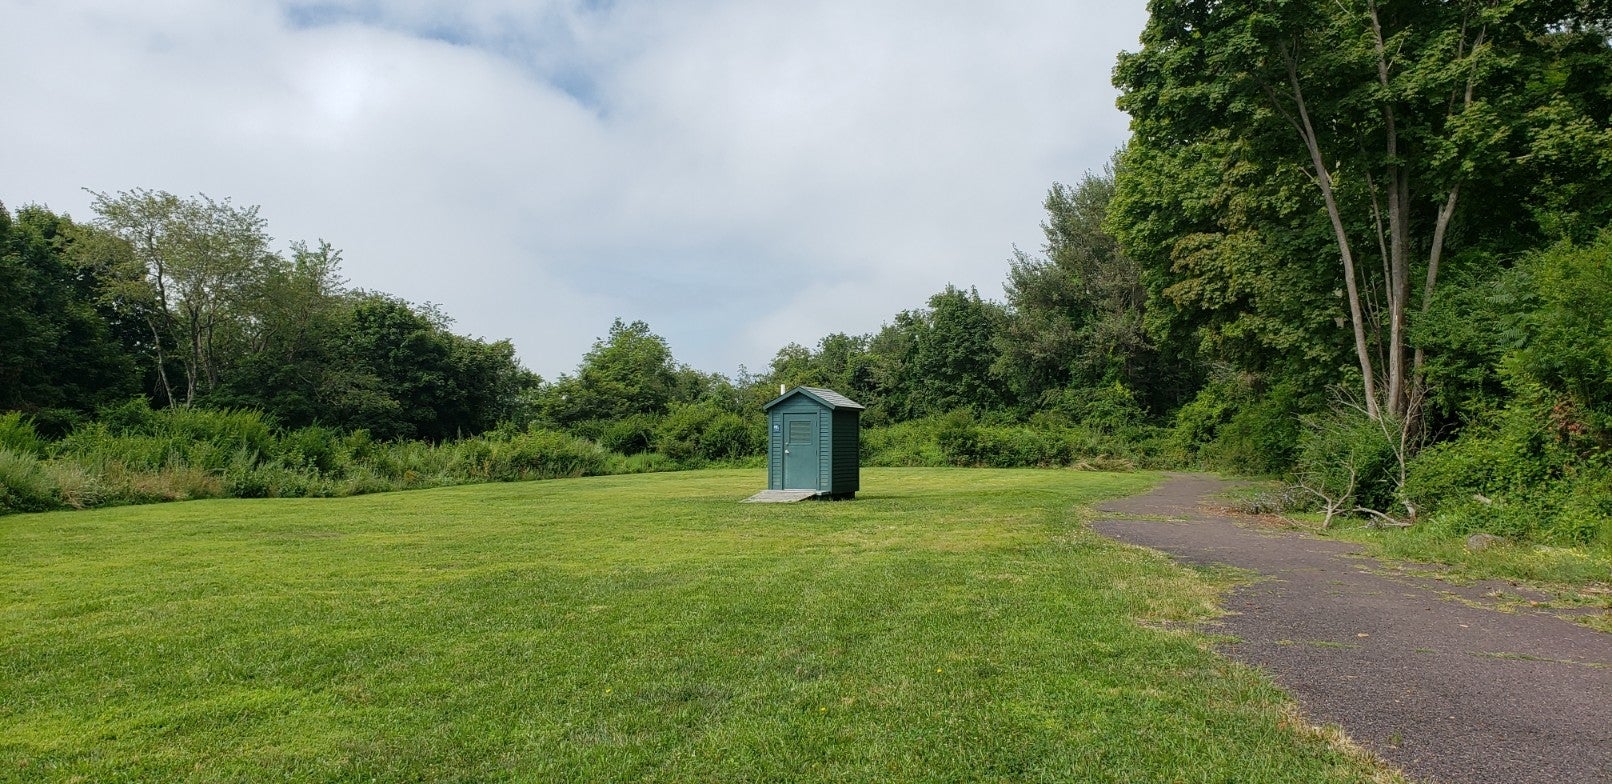 Group campsites have picnic tables, grills, and a composting toilet.